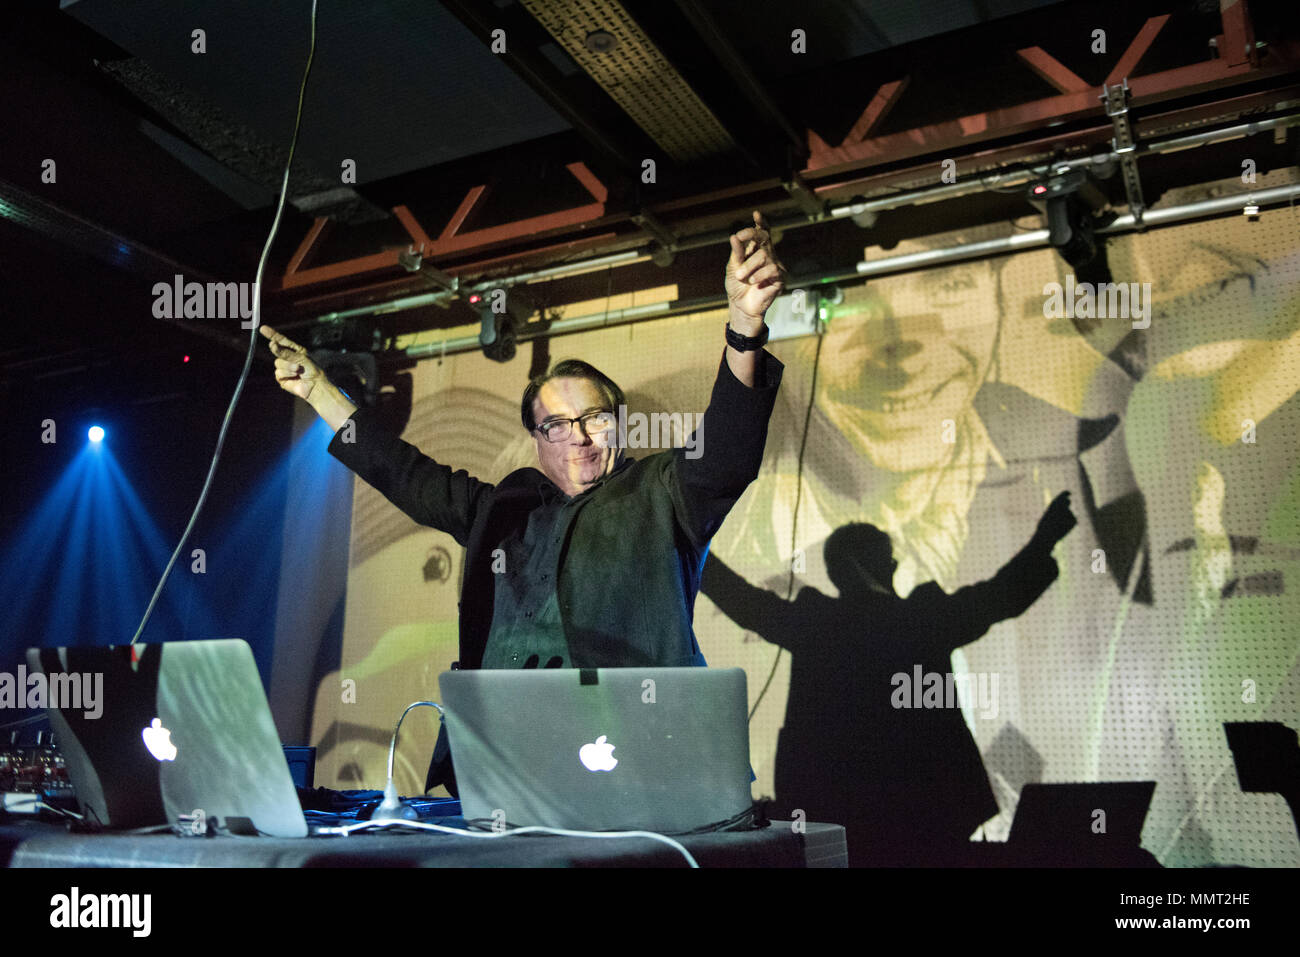 Leeds, UK. 12th May 2018. Wolfgang Flur, former member of German electronic band Kraftwerk performs a set at the Brudenell Social Club, Leeds, UK. In the background are projected images of Kraftwerk members. Credit: John Bentley/Alamy Live News Stock Photo